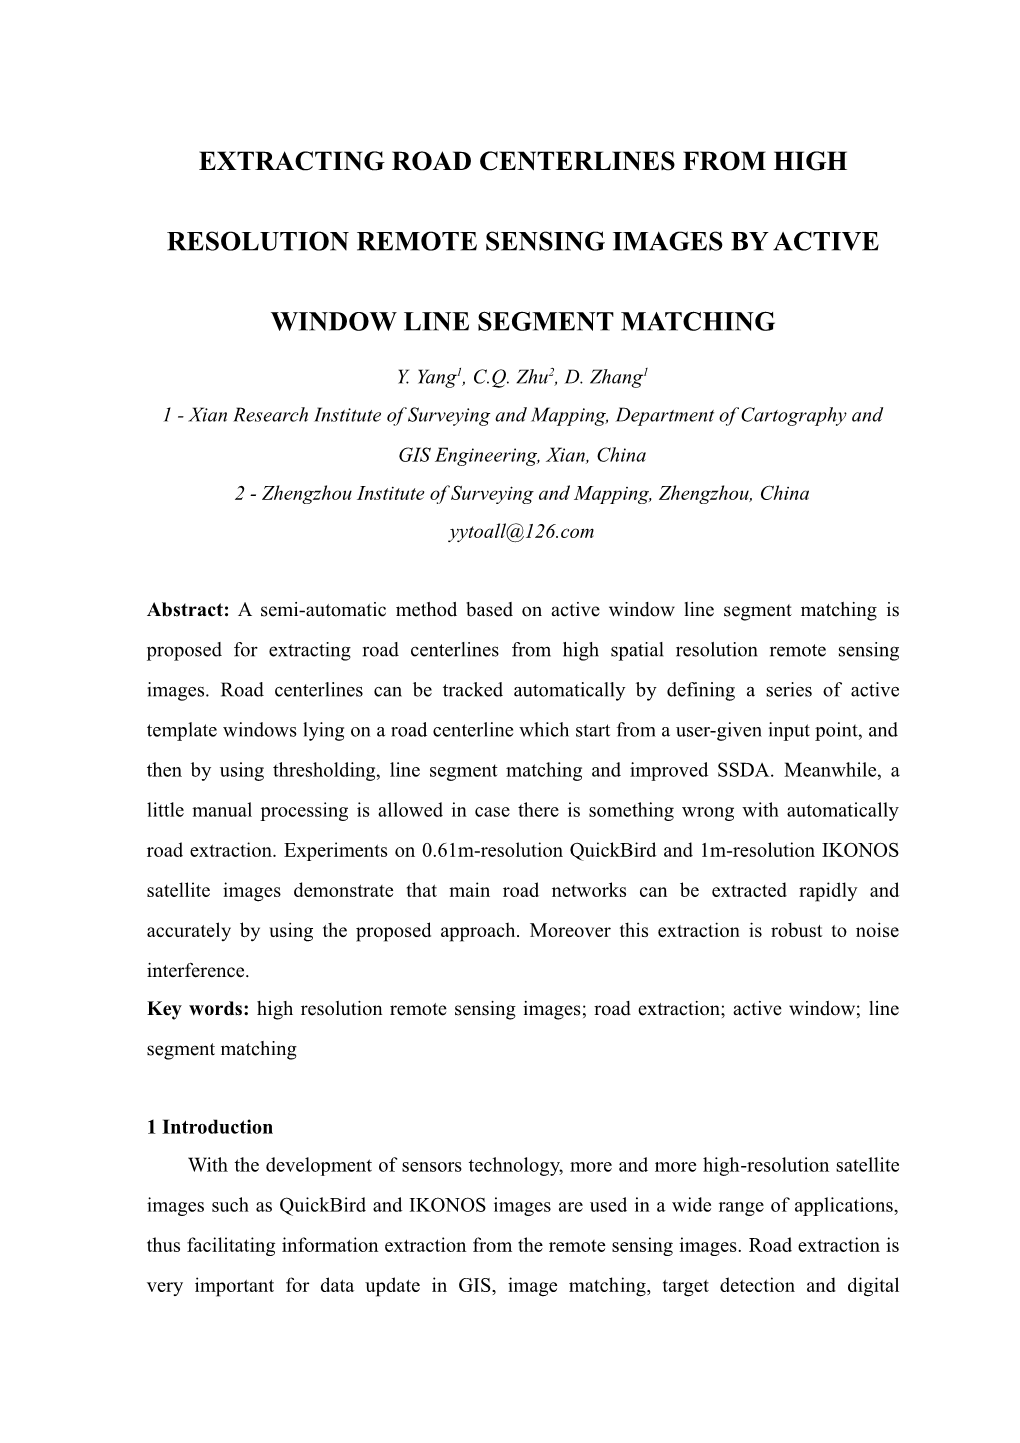 Extracting Road Centerlines from High Resolution Remote Sensing Images by Active Window